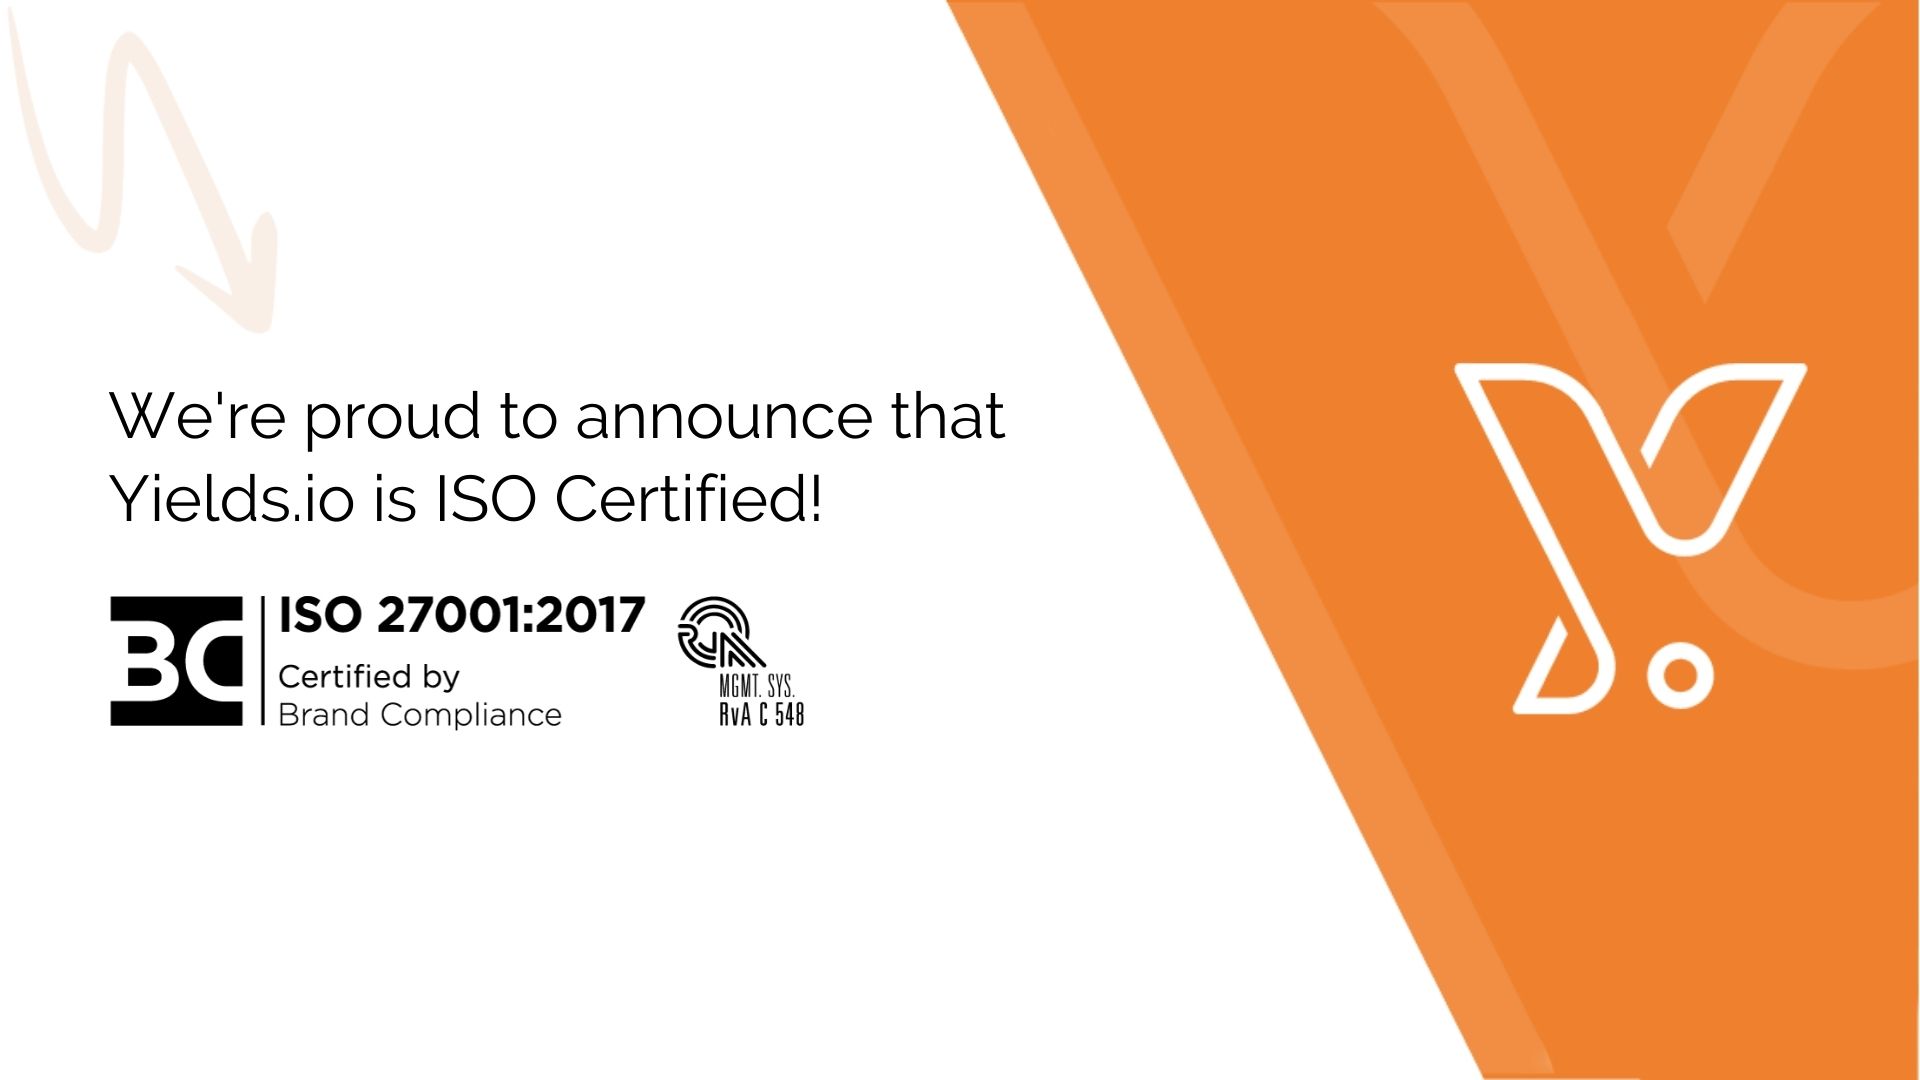 Yields.io is now ISO 27001:2017 certified!